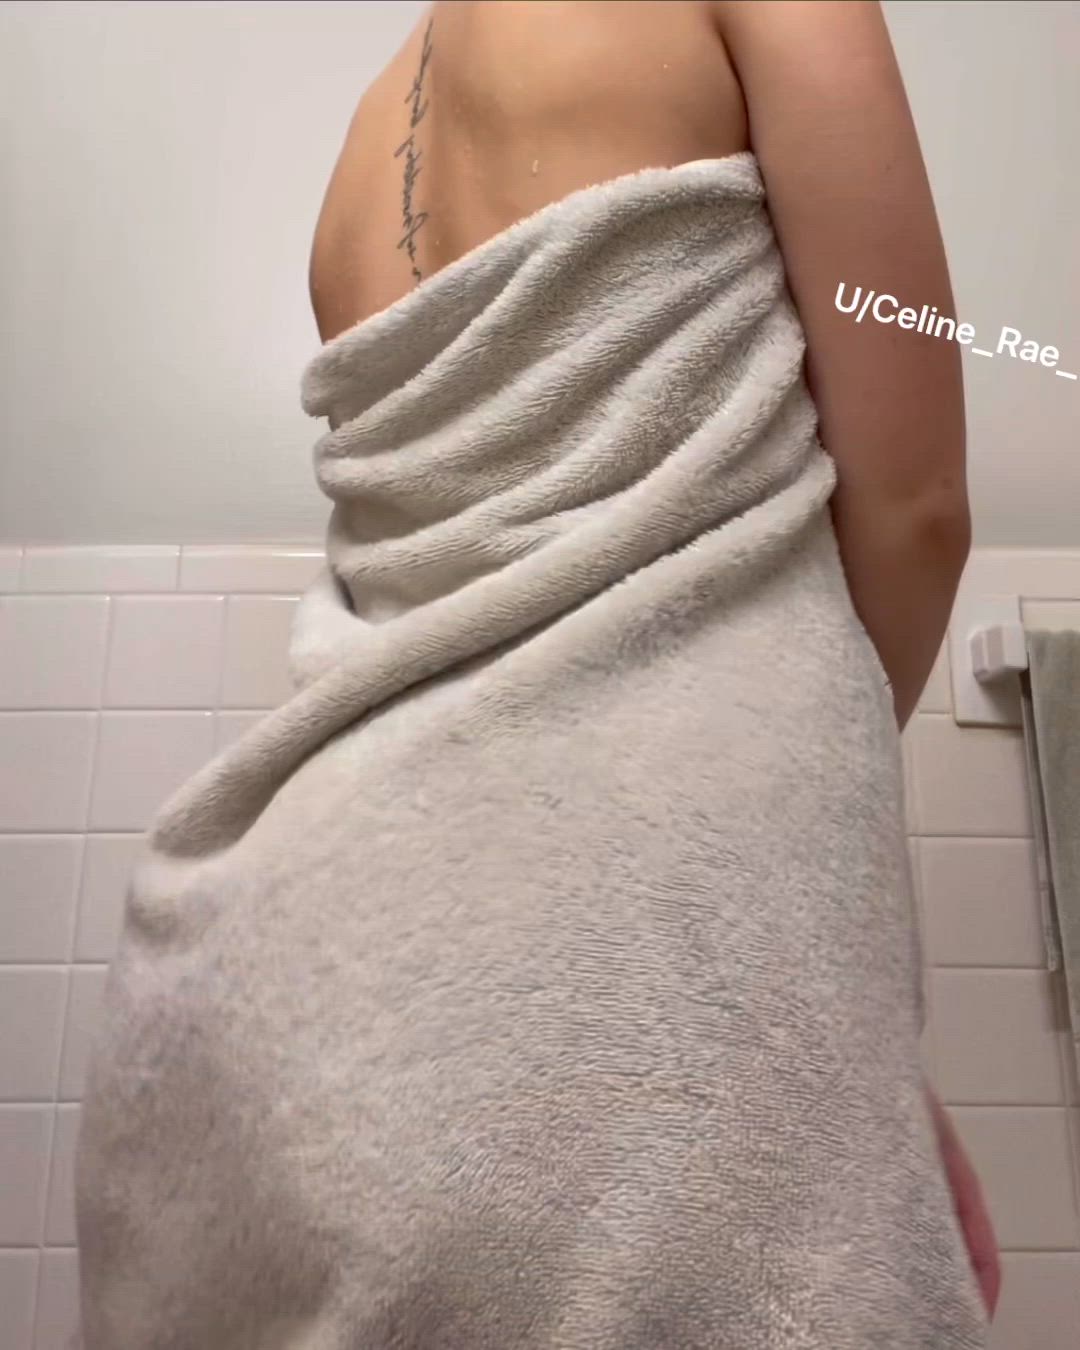 Ass porn video with onlyfans model celinerae <strong>@itsjustlina</strong>